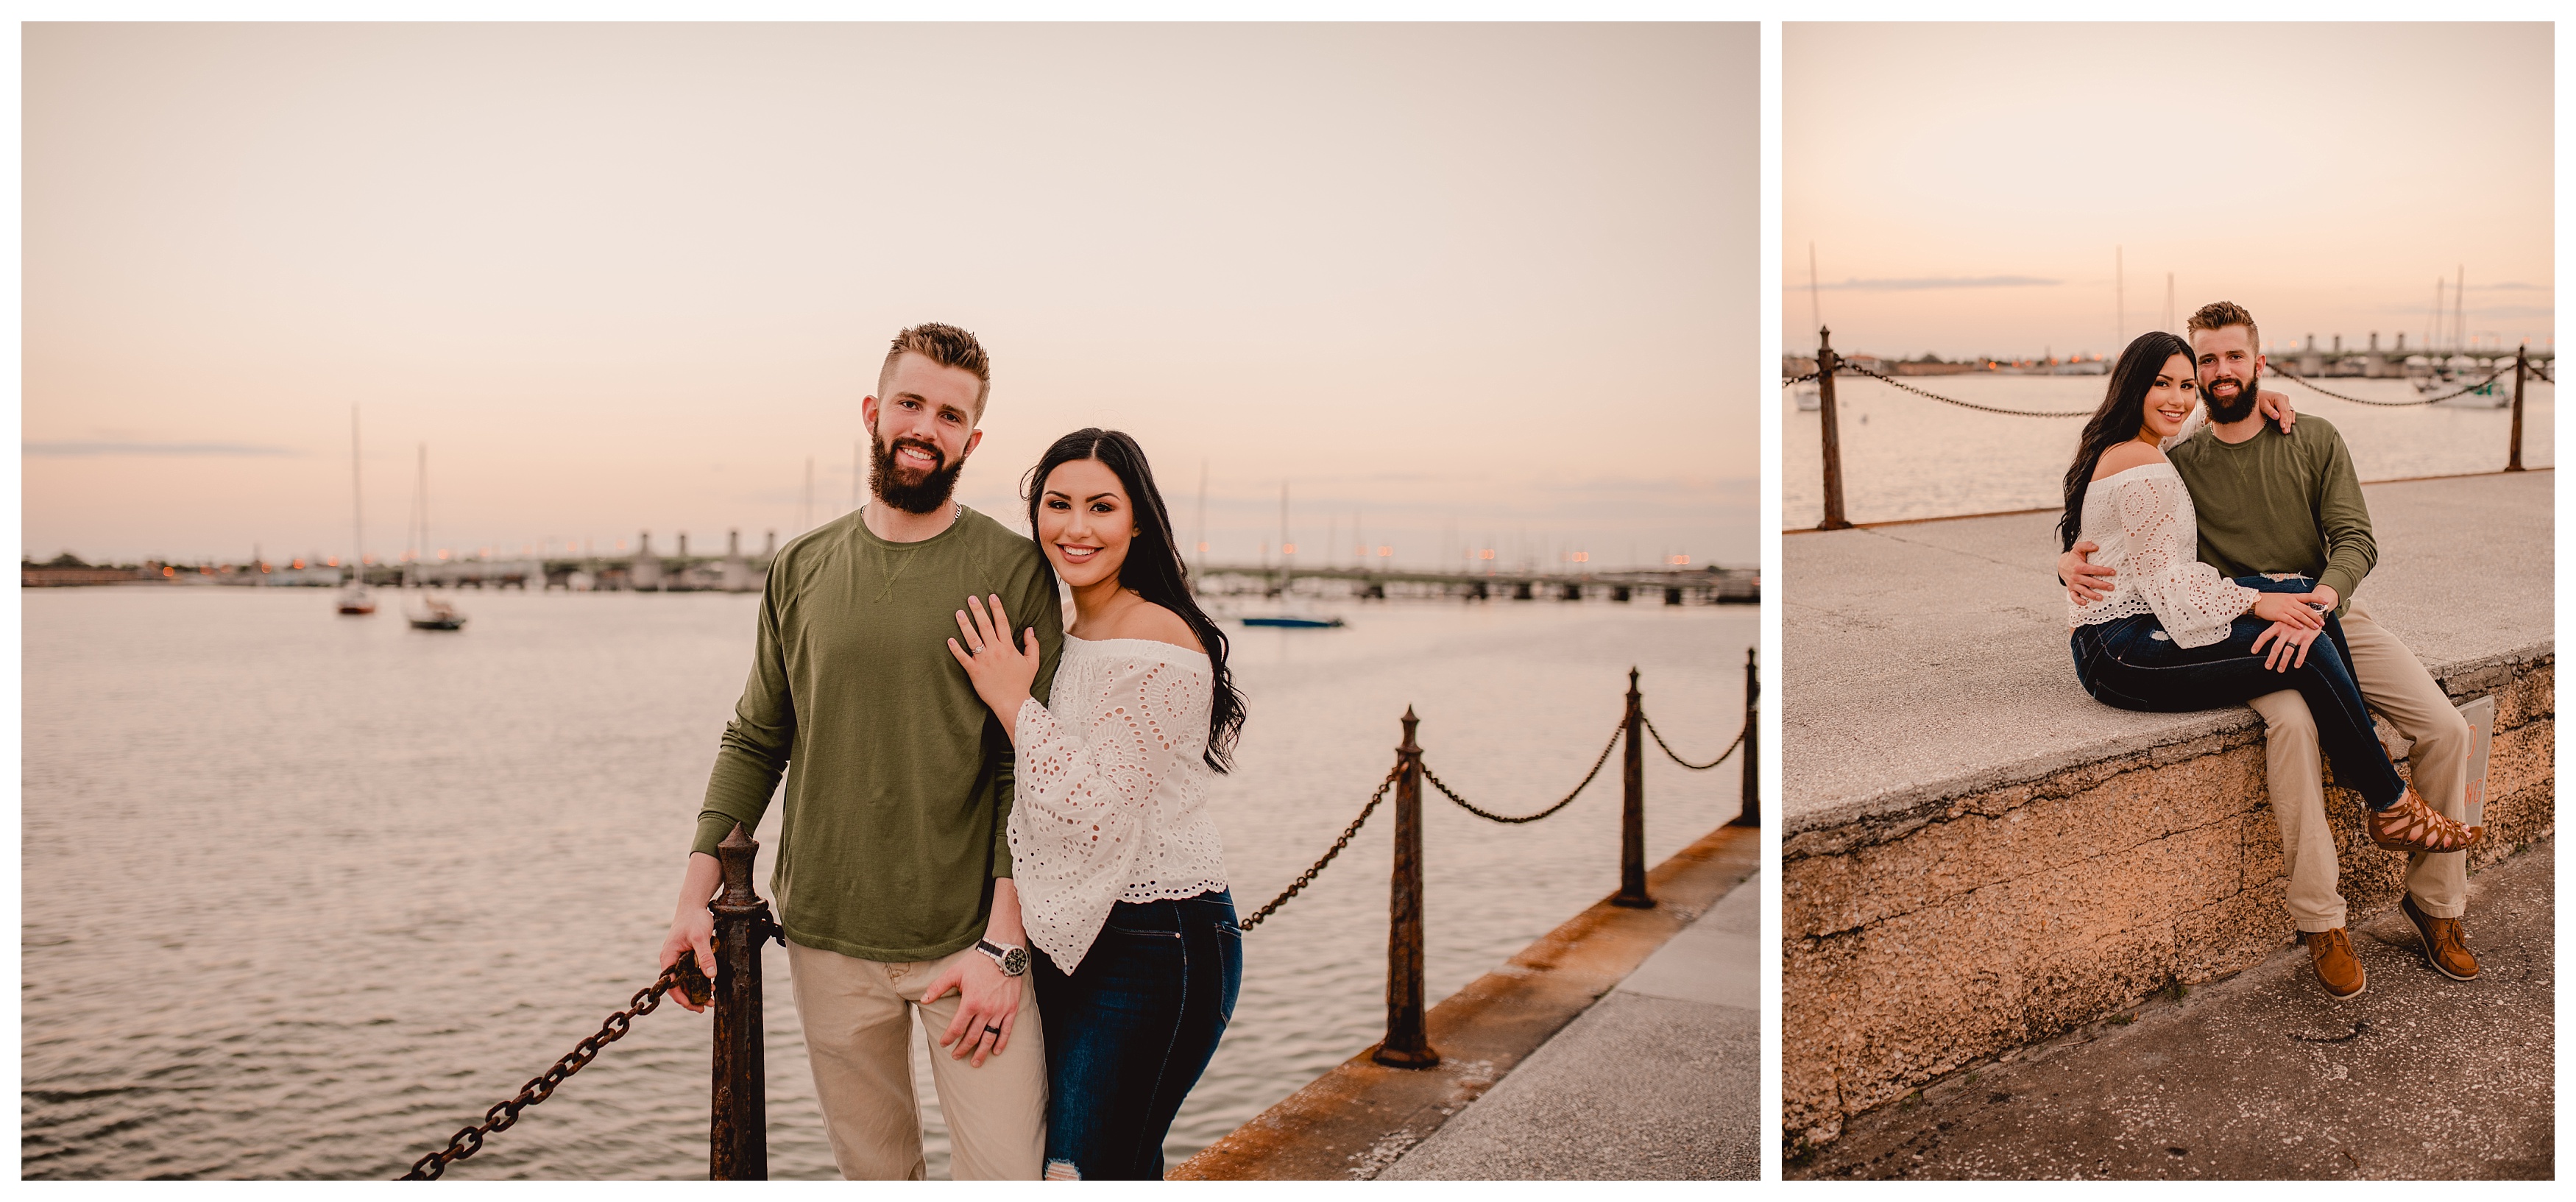 Sunset couples photos in historic St. Augustine near the ocean. Shelly Williams Photography